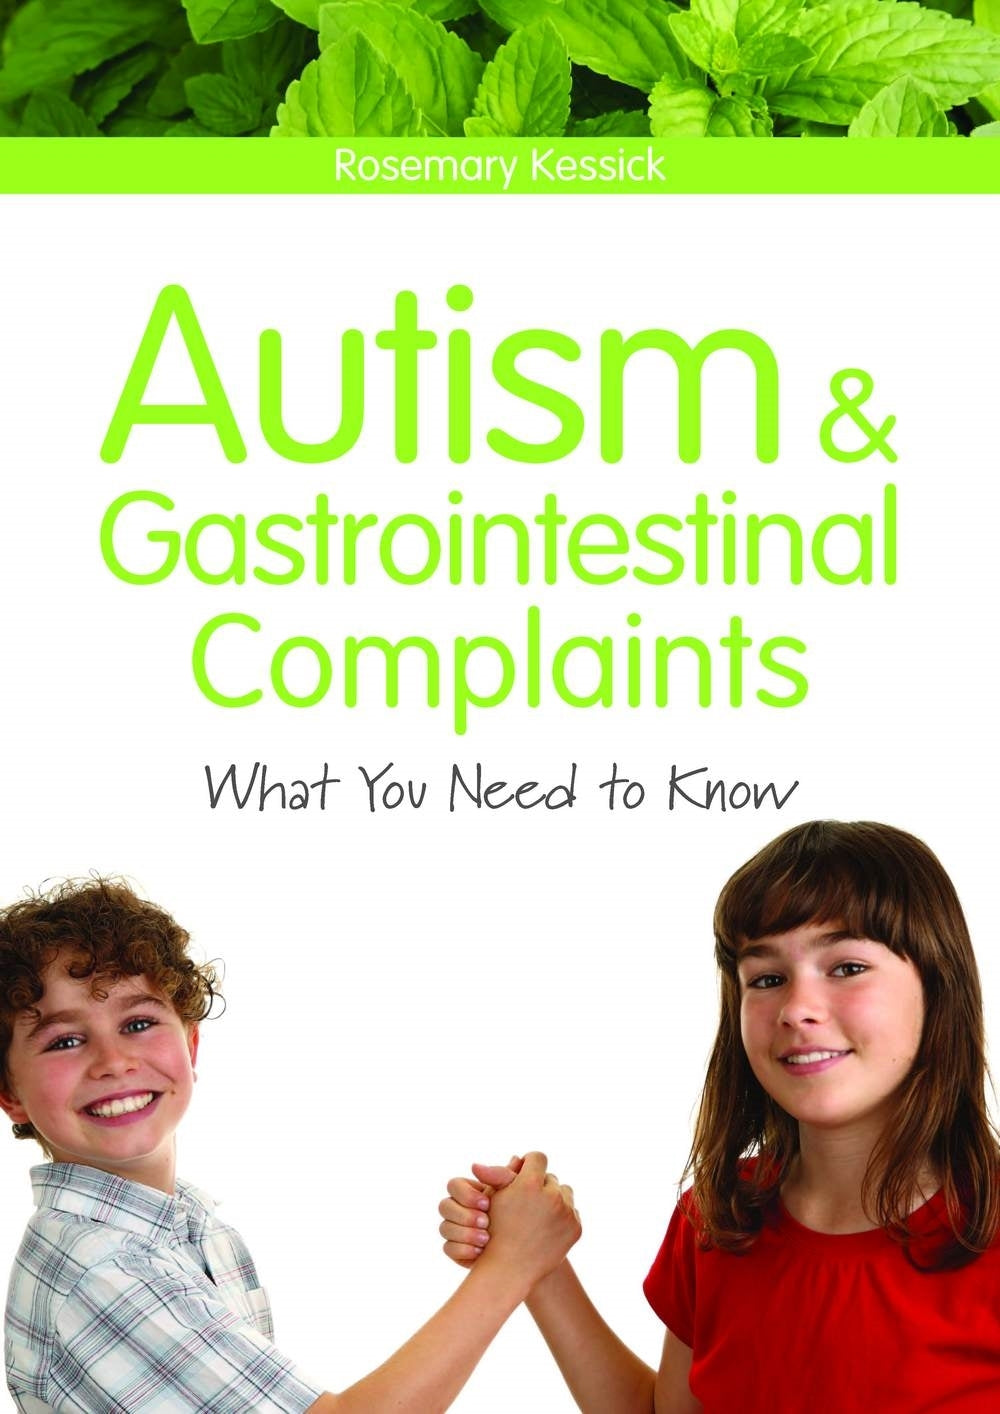 Autism and Gastrointestinal Complaints by Rosemary Kessick